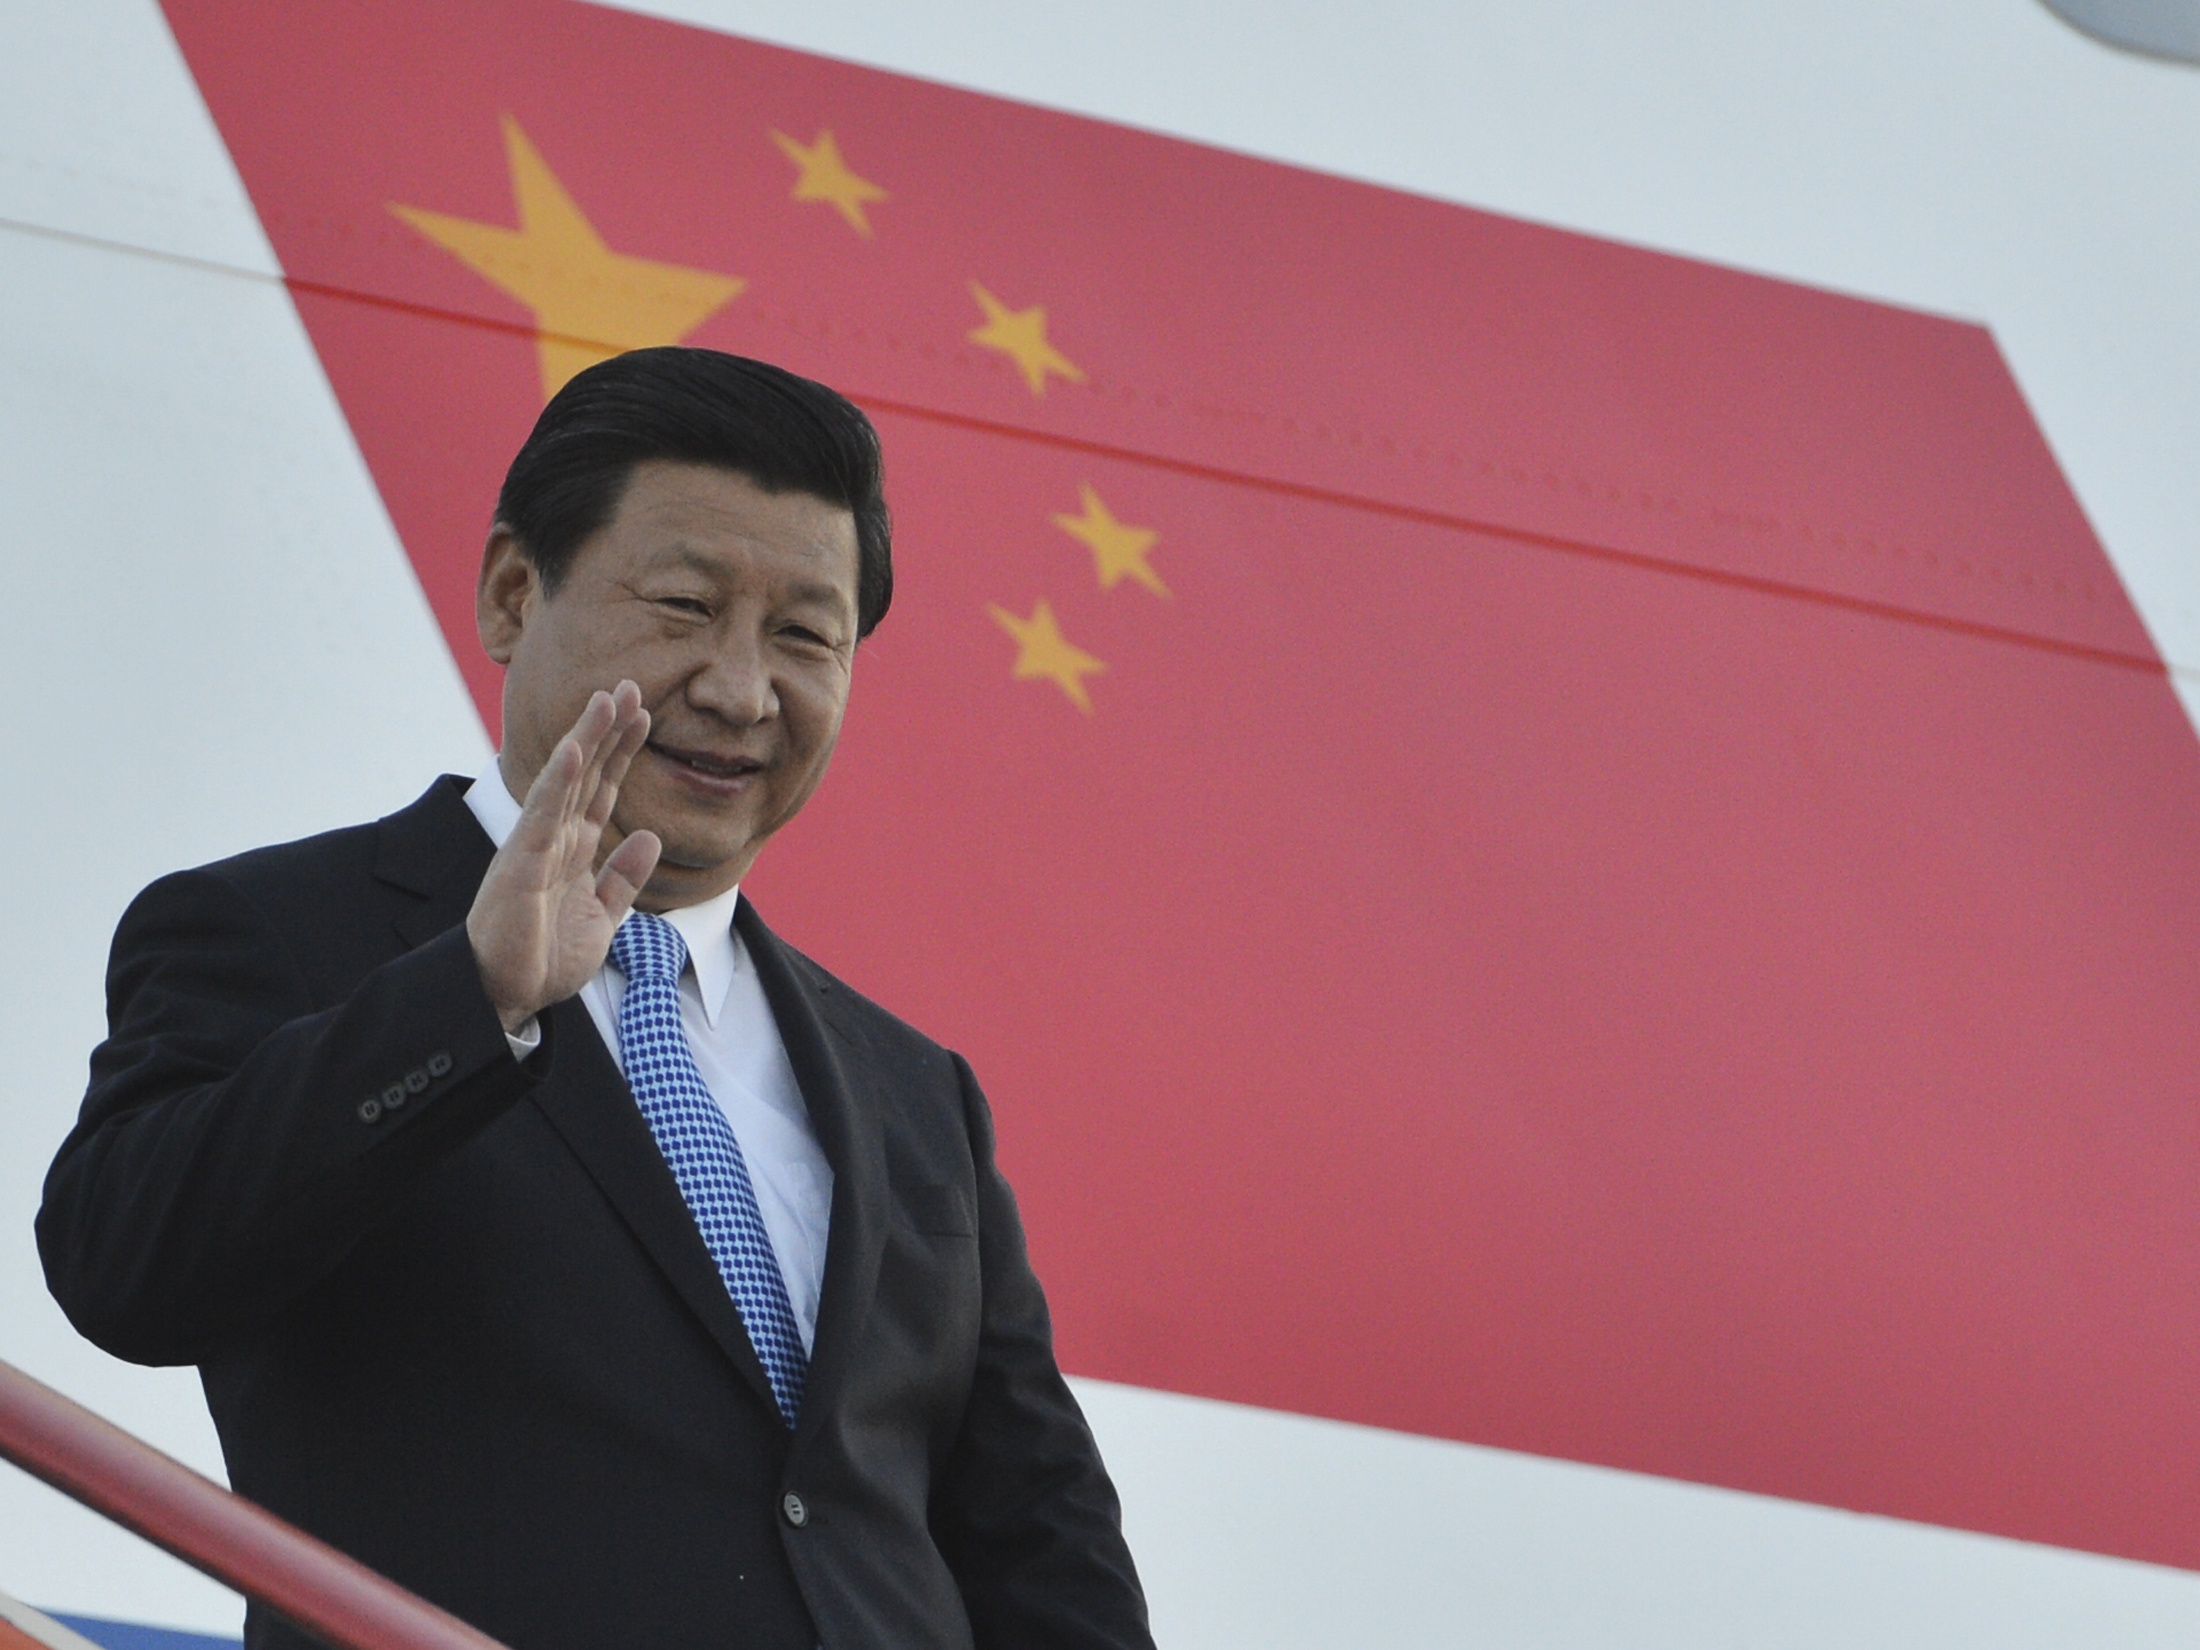 China's President Xi Jinping walks down stairs upon his arrival a day before the G20 Summit in St. Petersburg on September 4, 2013. Photo: Reuters